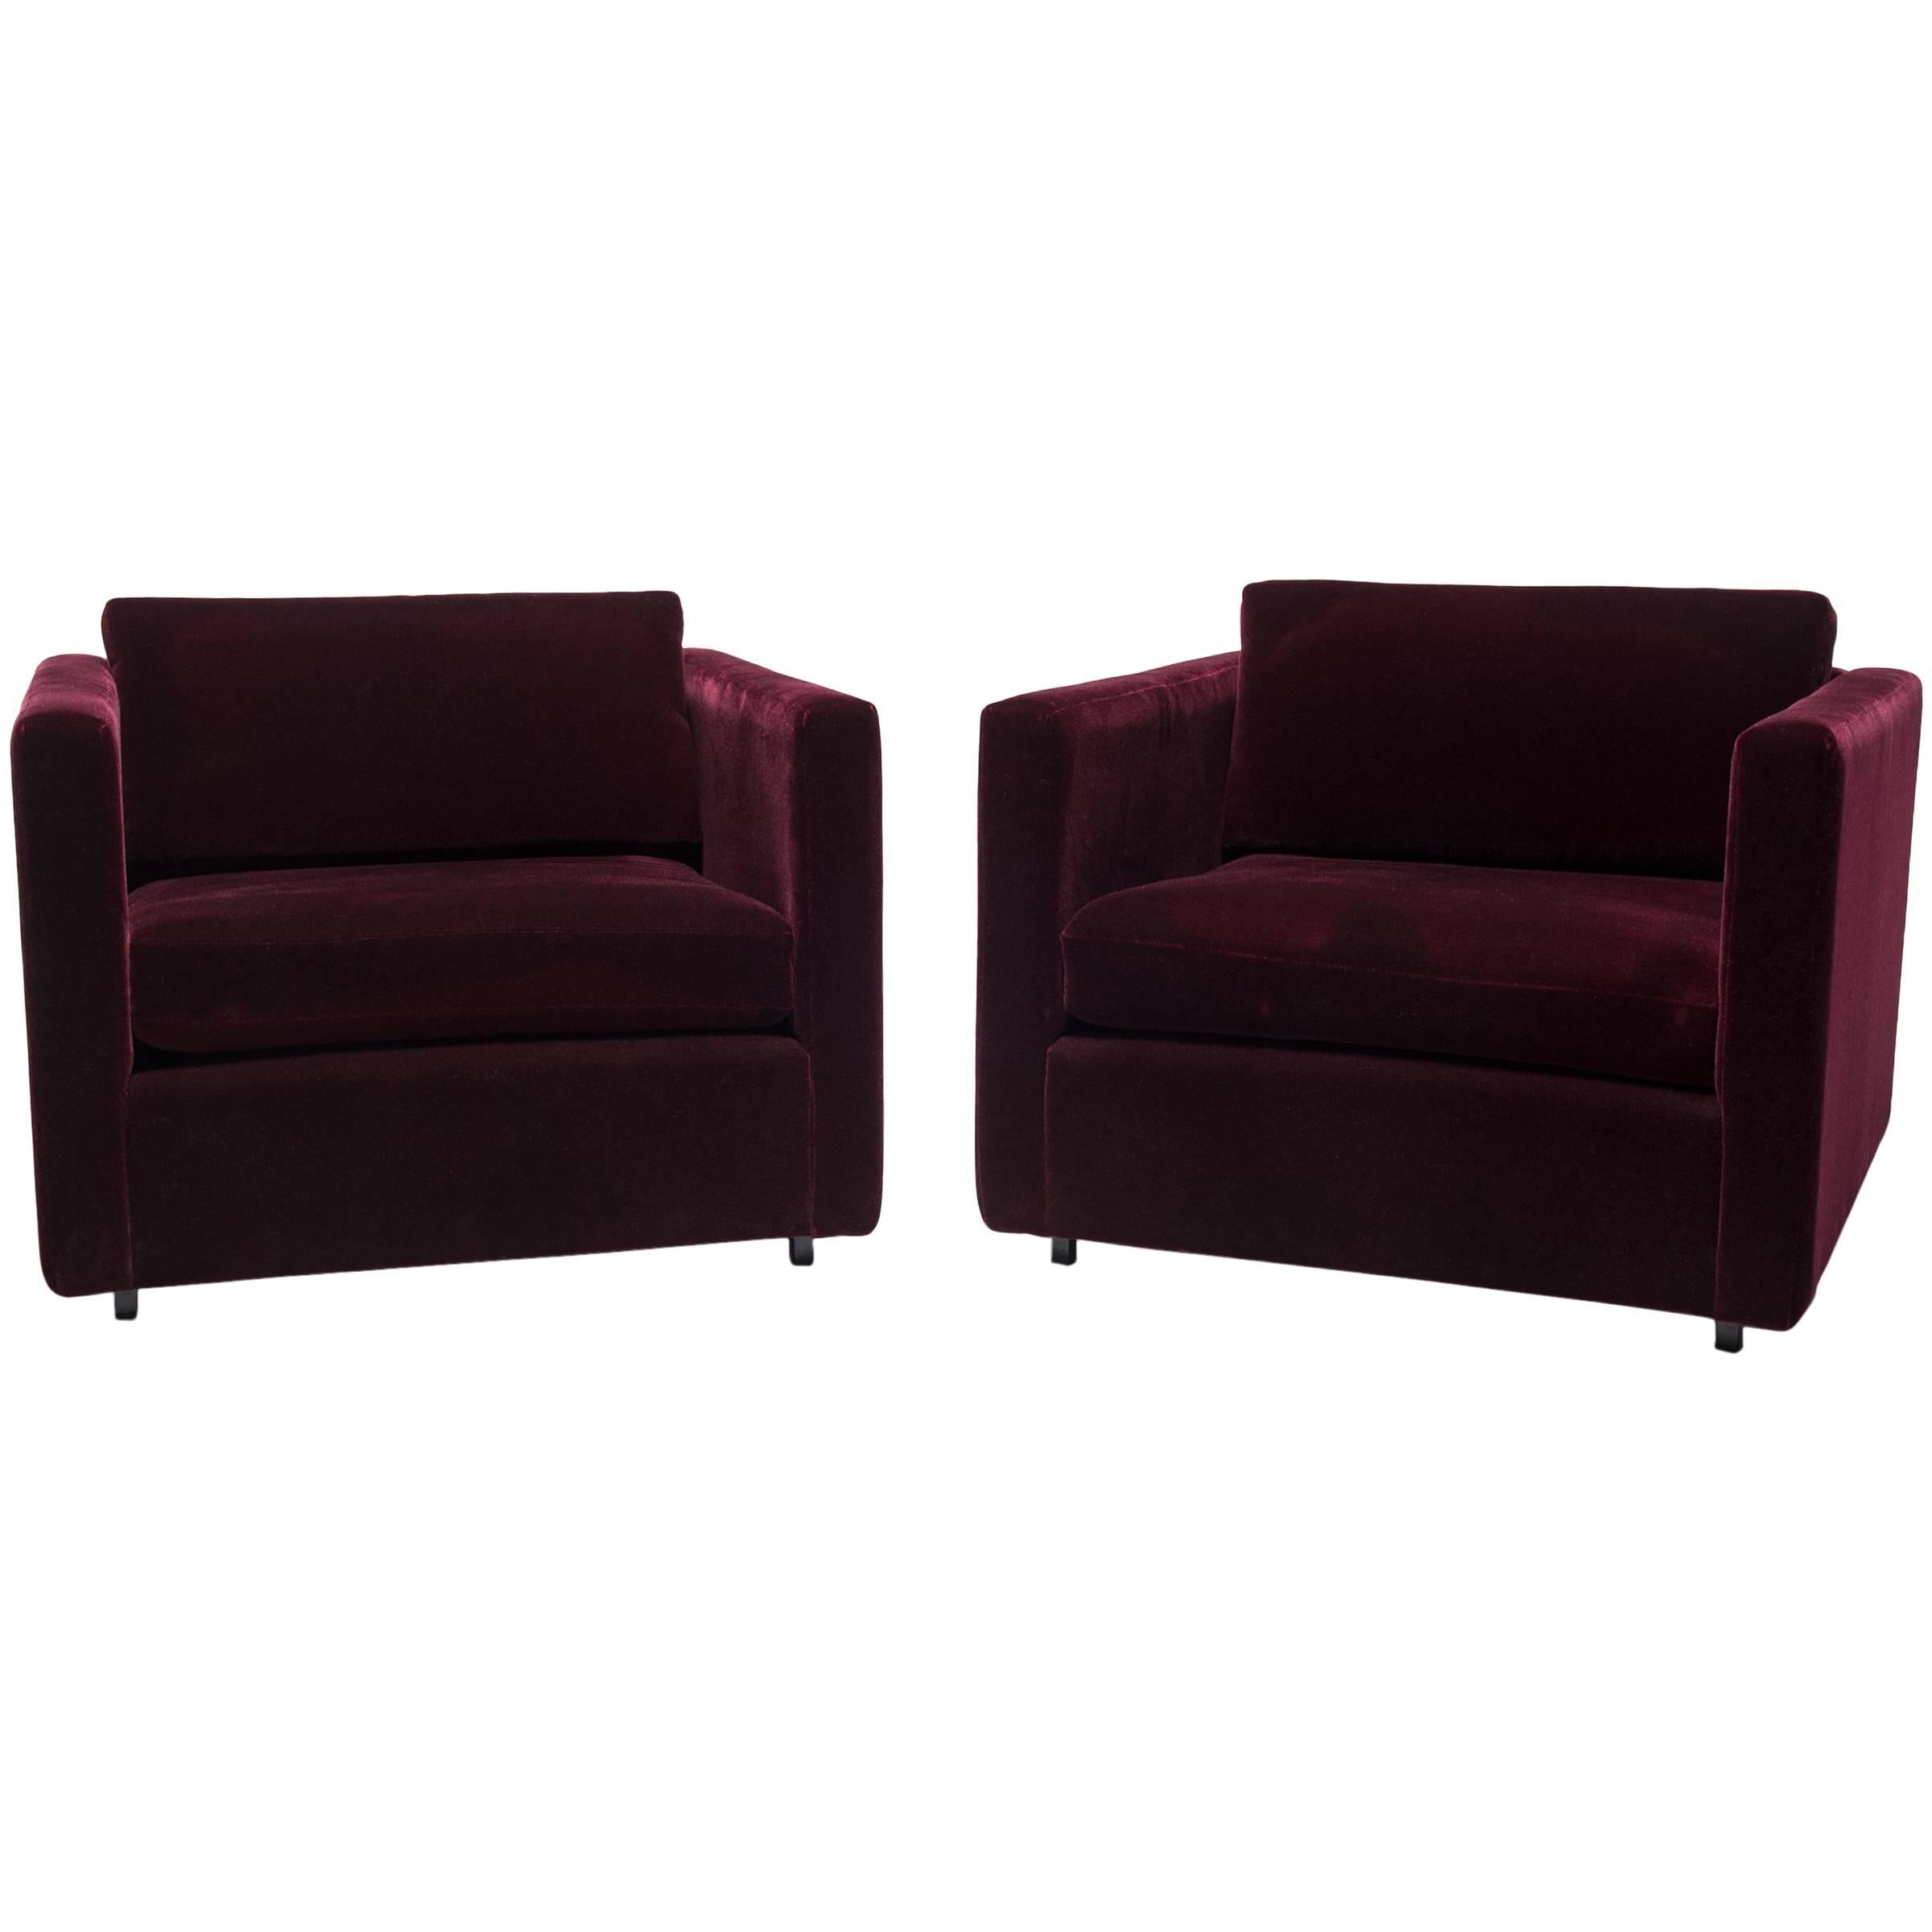 Pair of Vintage Knoll "Pfister" Lounge Chairs in Deep Red Mohair